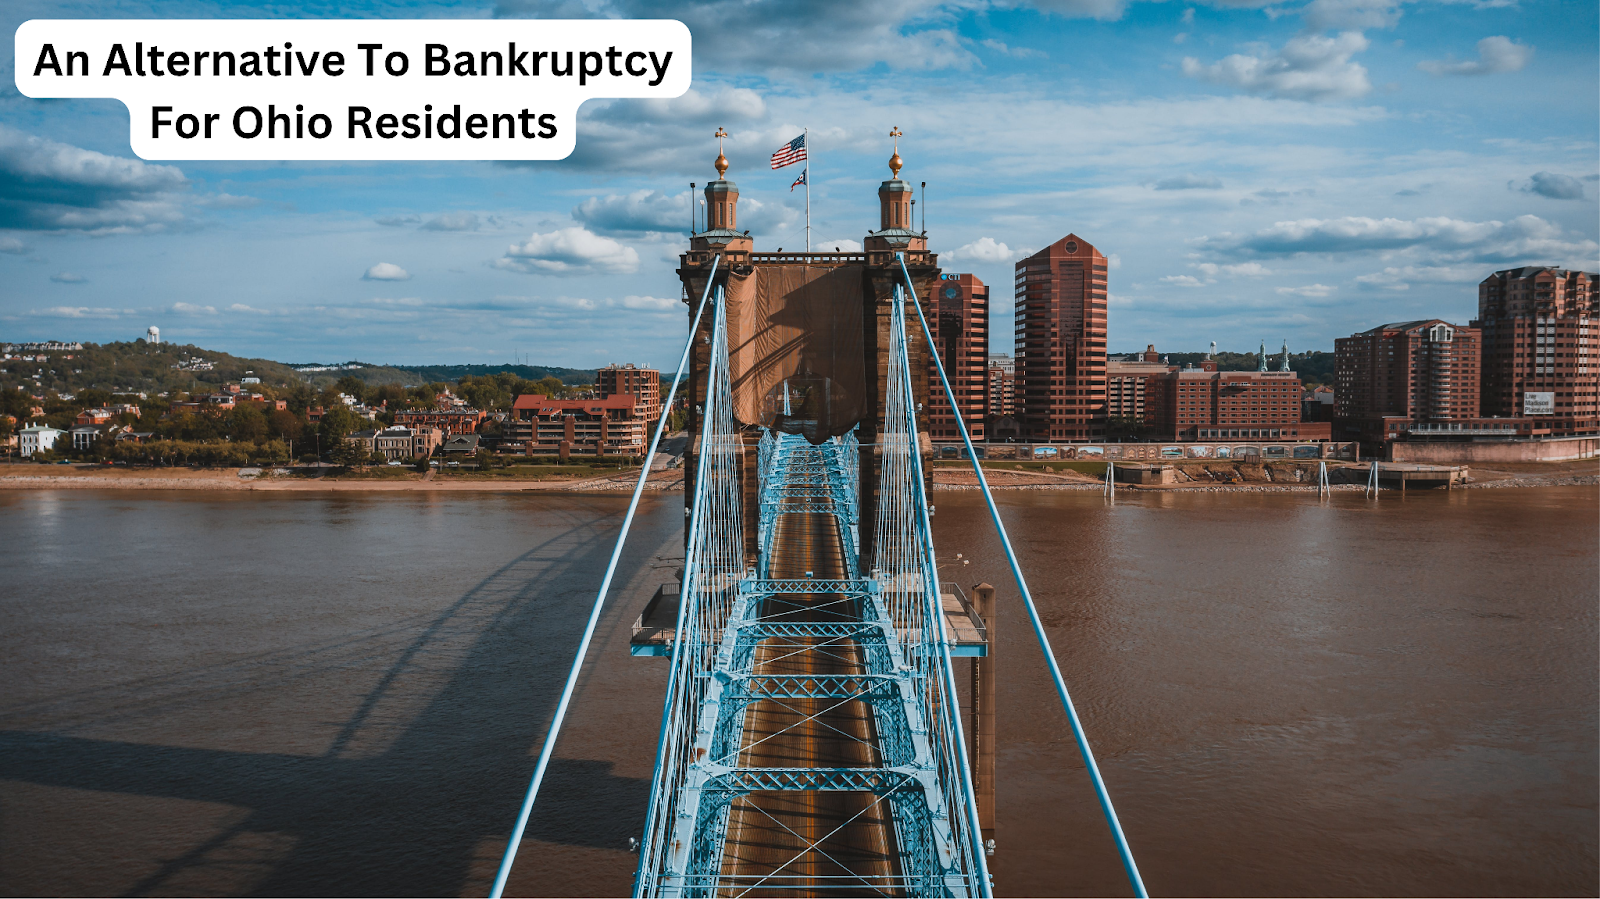 An Alternative To Bankruptcy For Ohio Residents